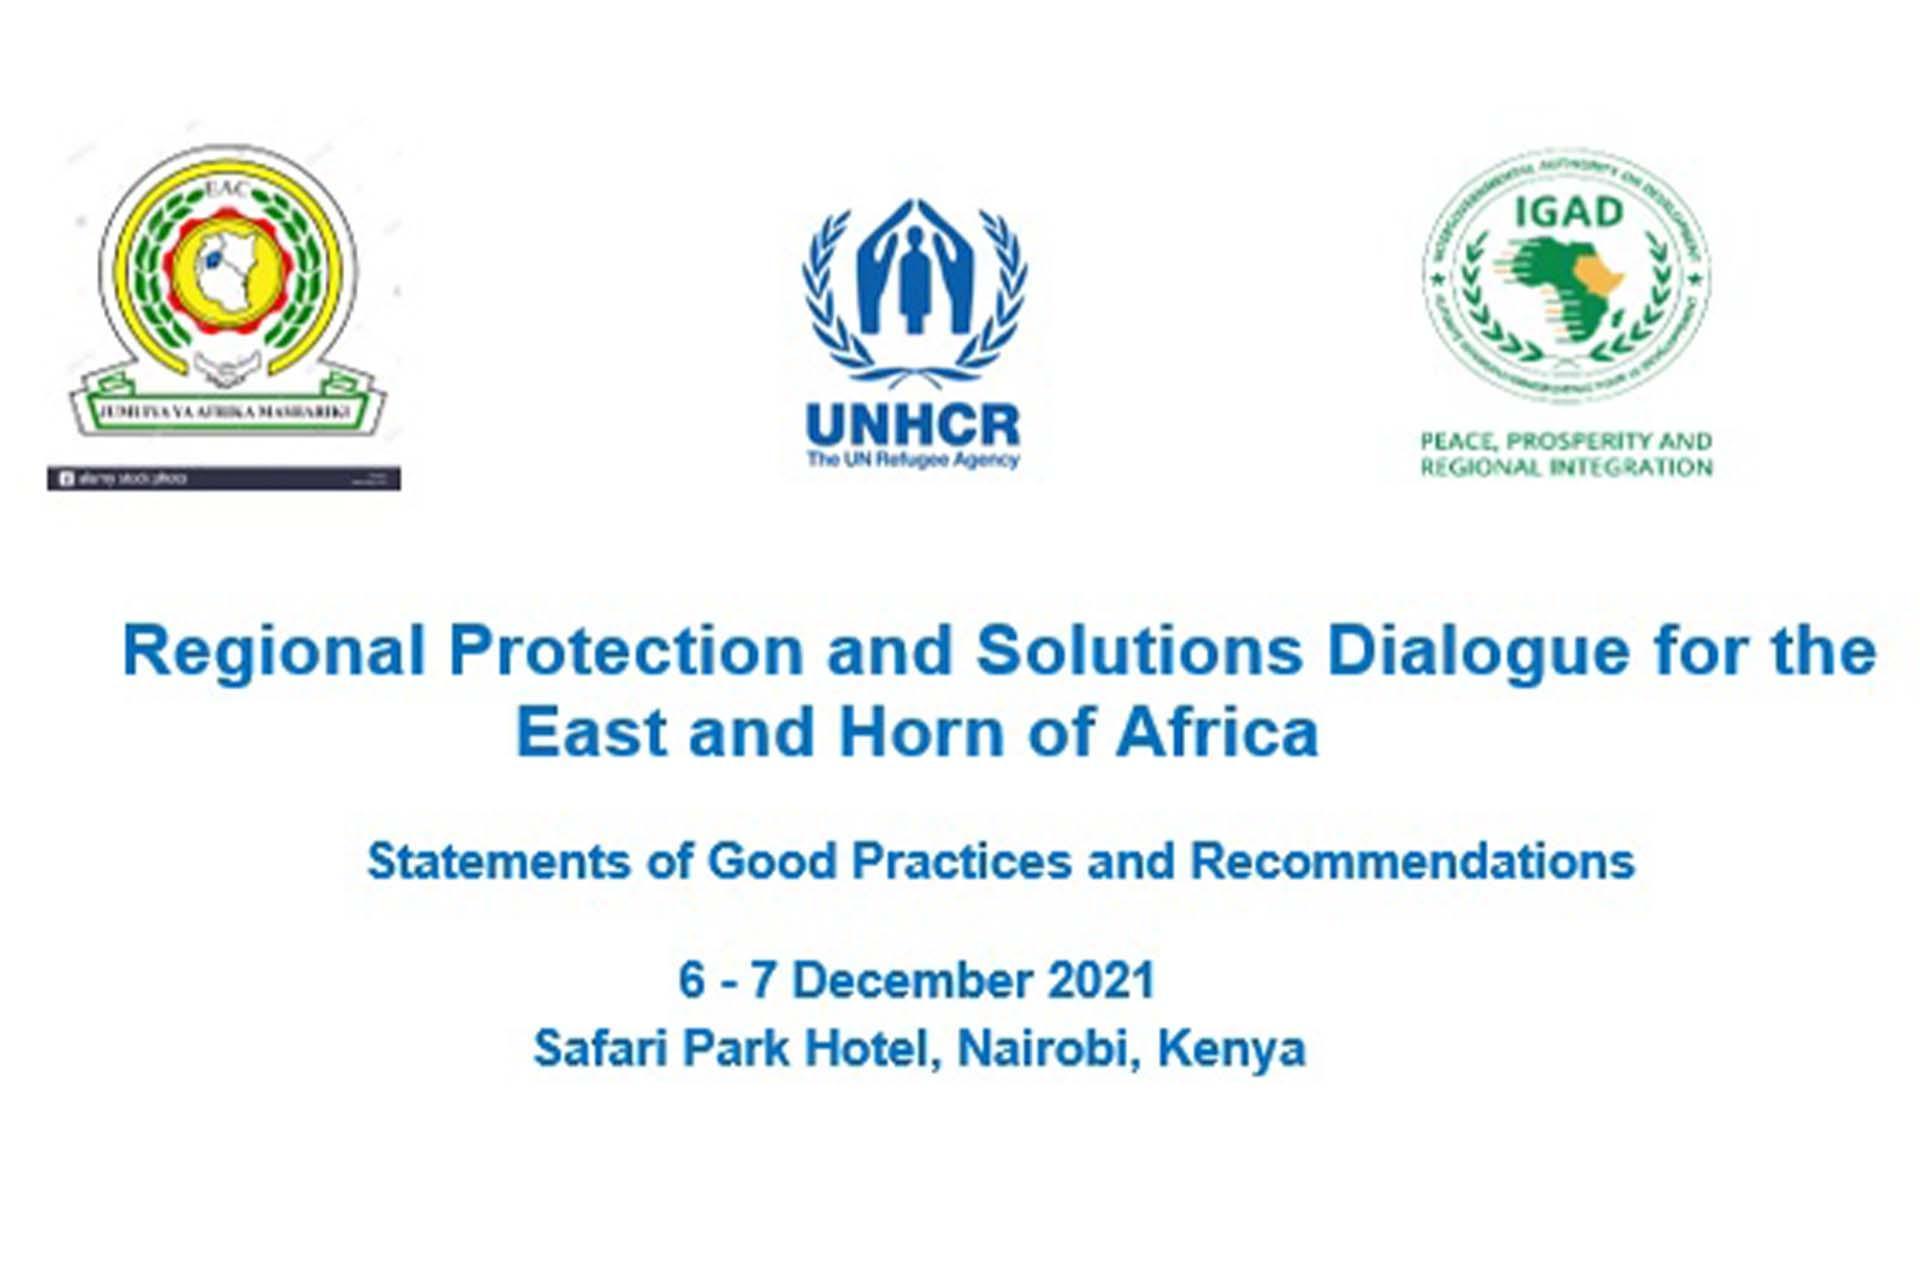 Regional Protection And Solutions Dialogue For The East And Horn Of Africa